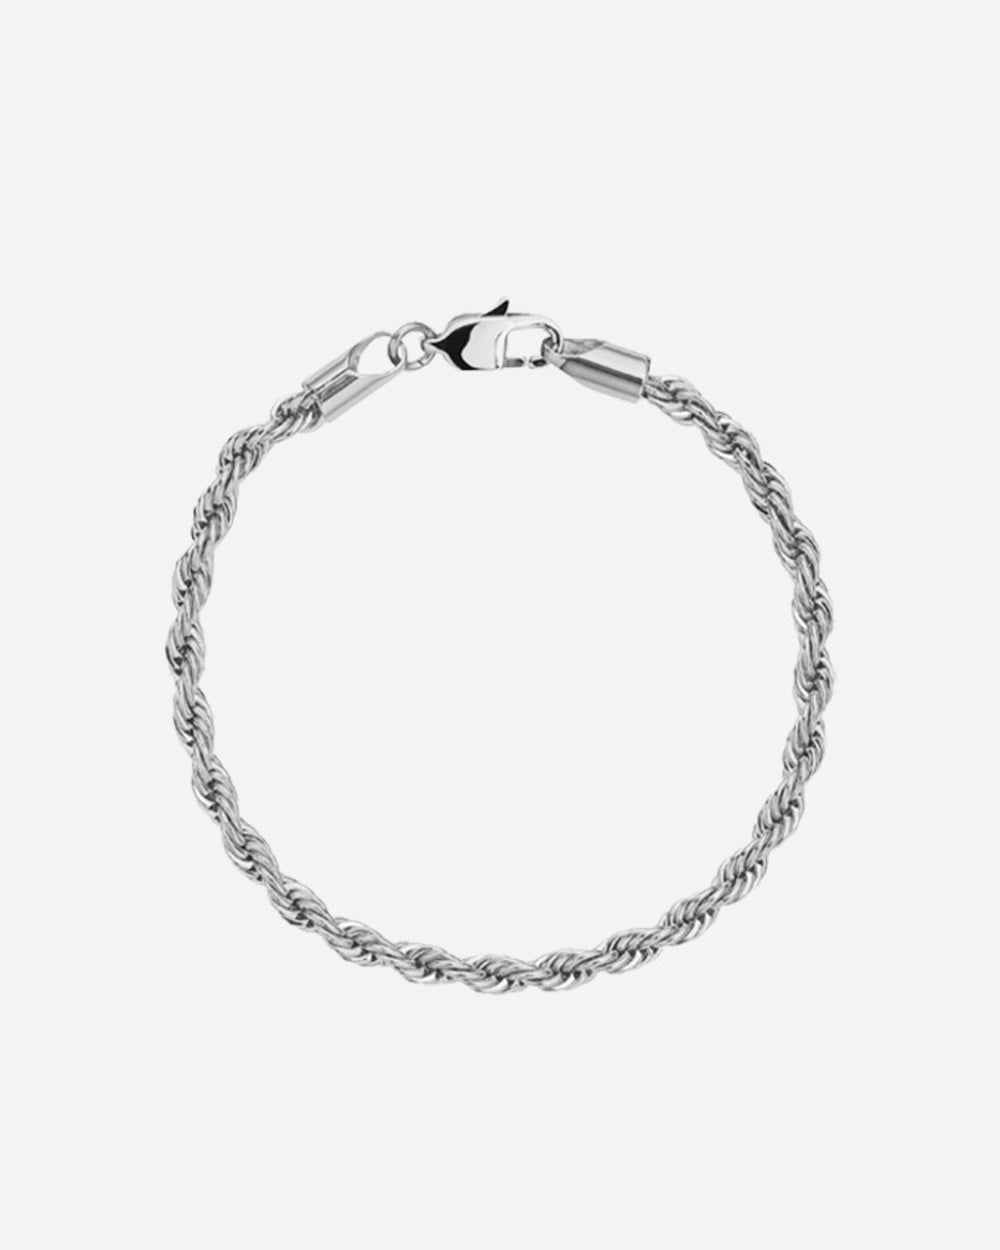 CLEAN ROPE BRACELET. - 3MM WHITE GOLD - Drippy Amsterdam